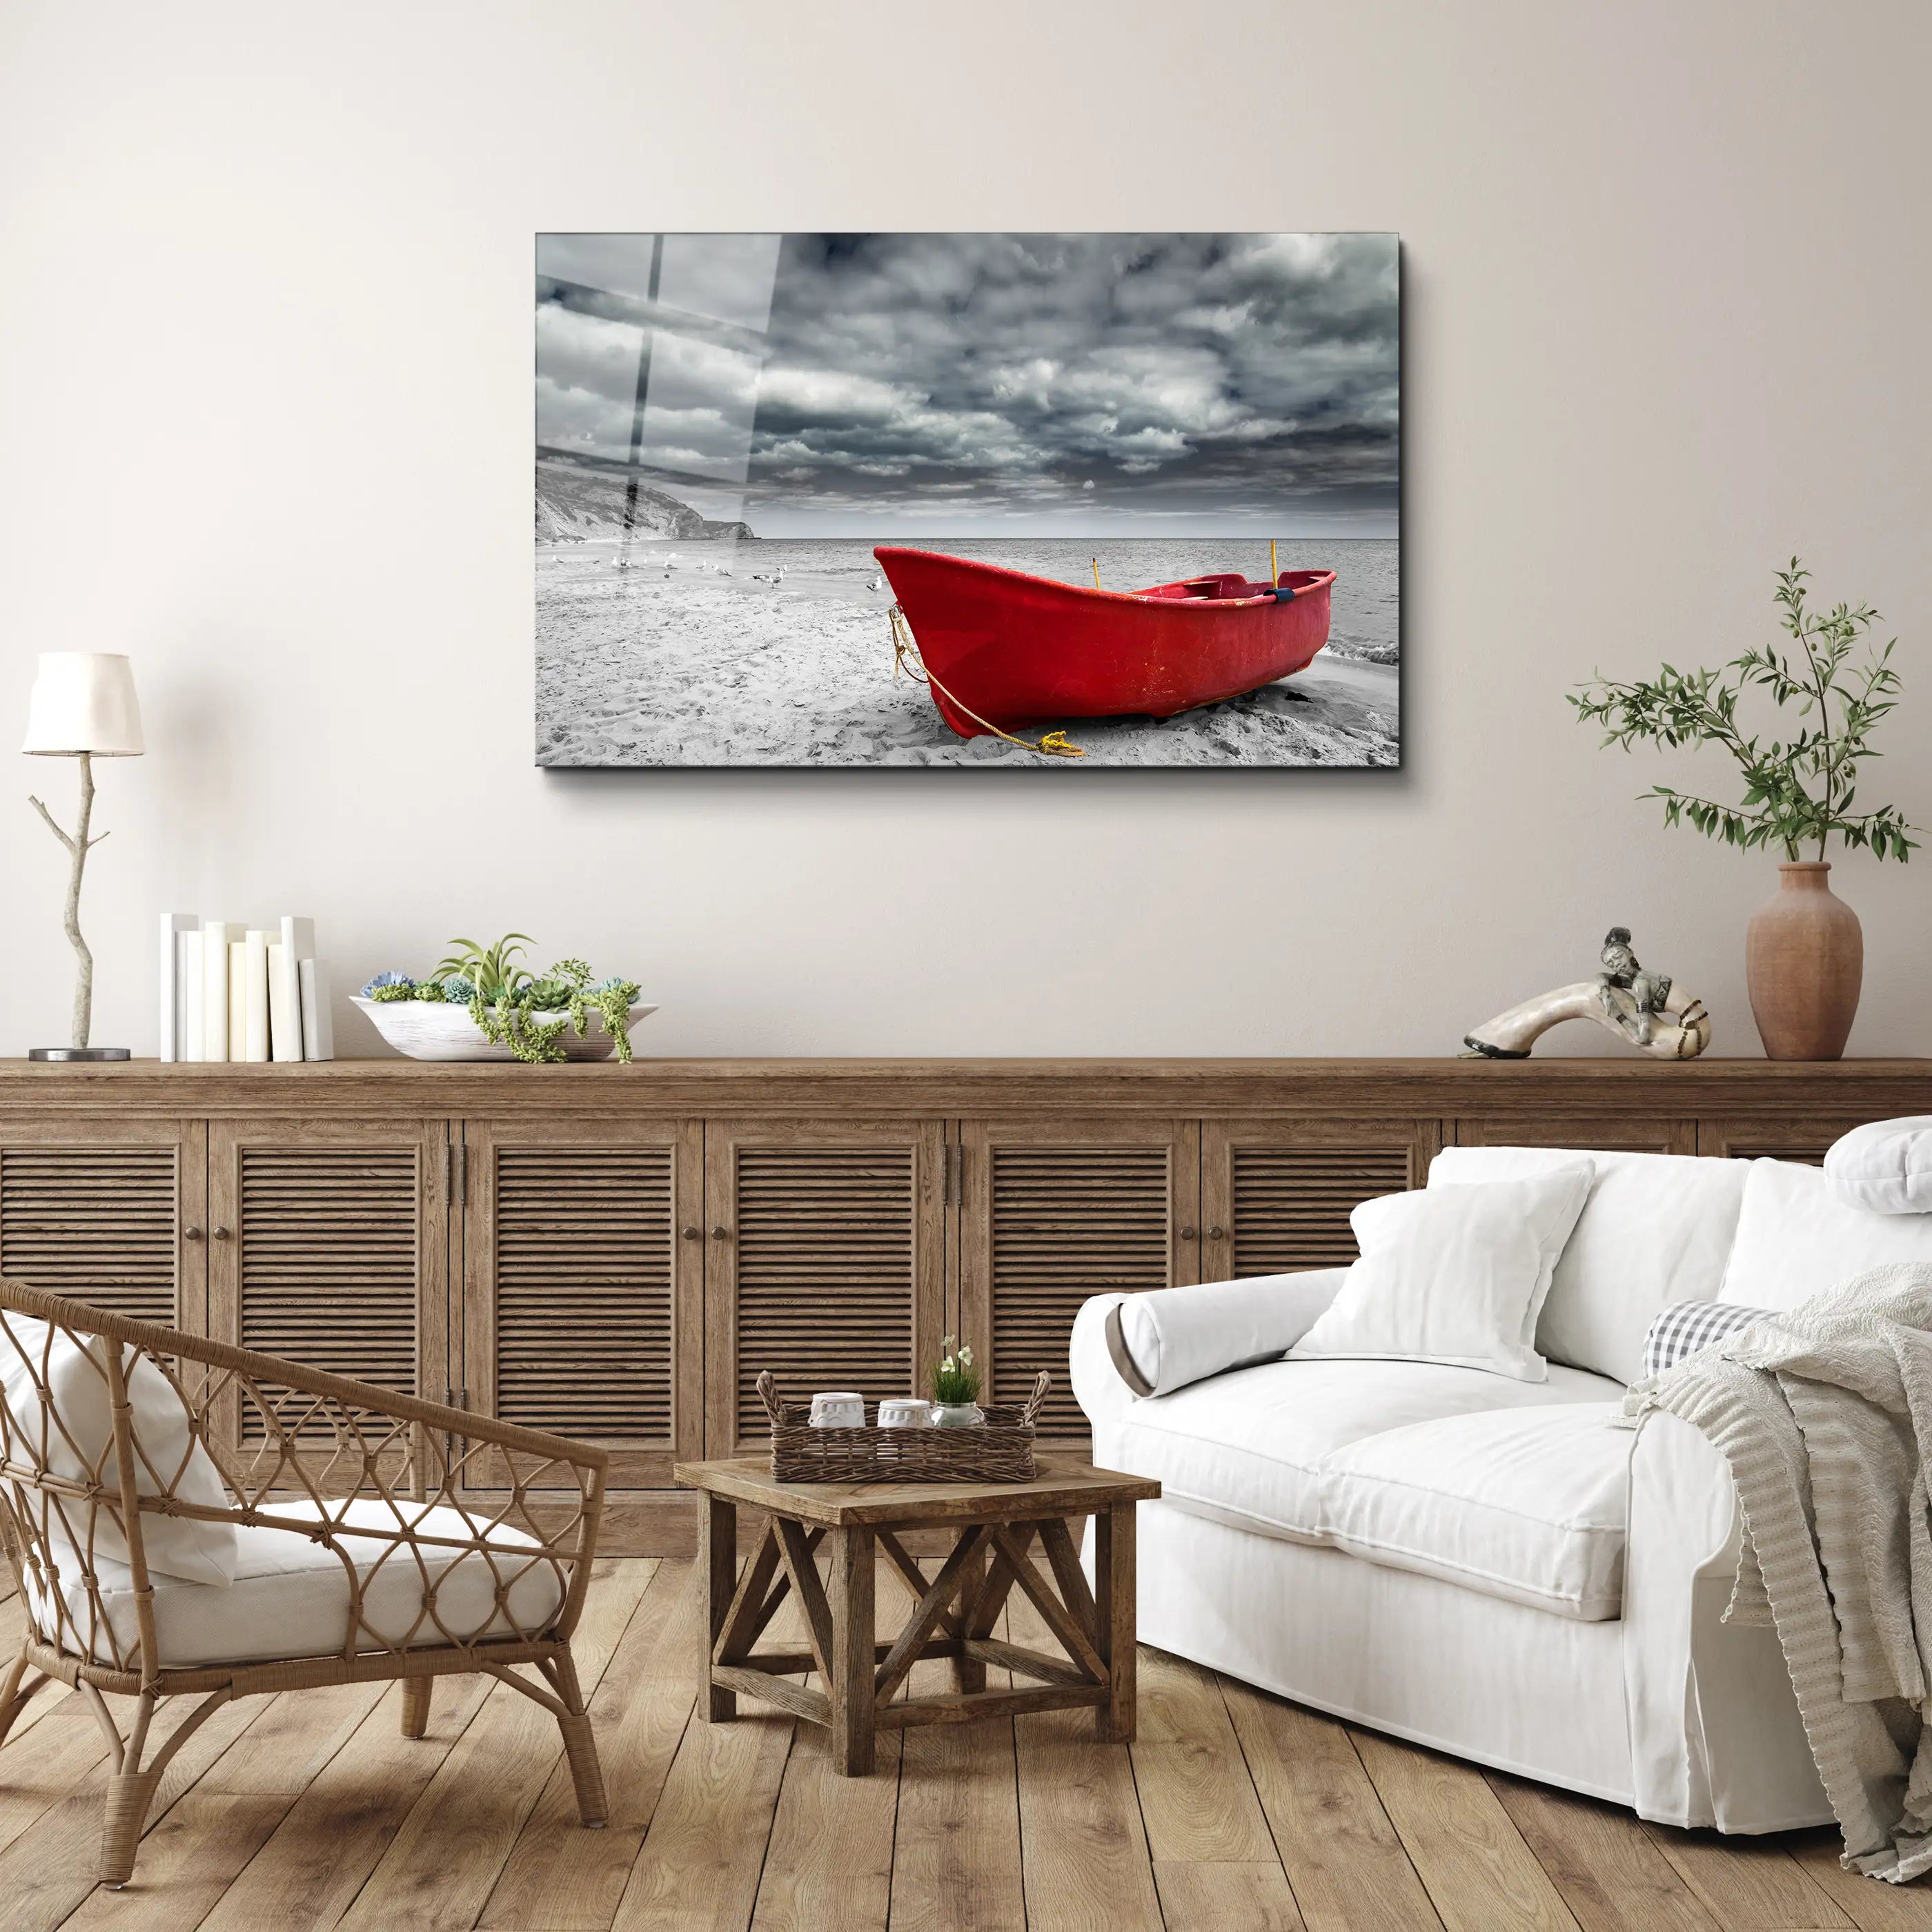 Boat on the Beach Surreal Sky Glass Wall Art